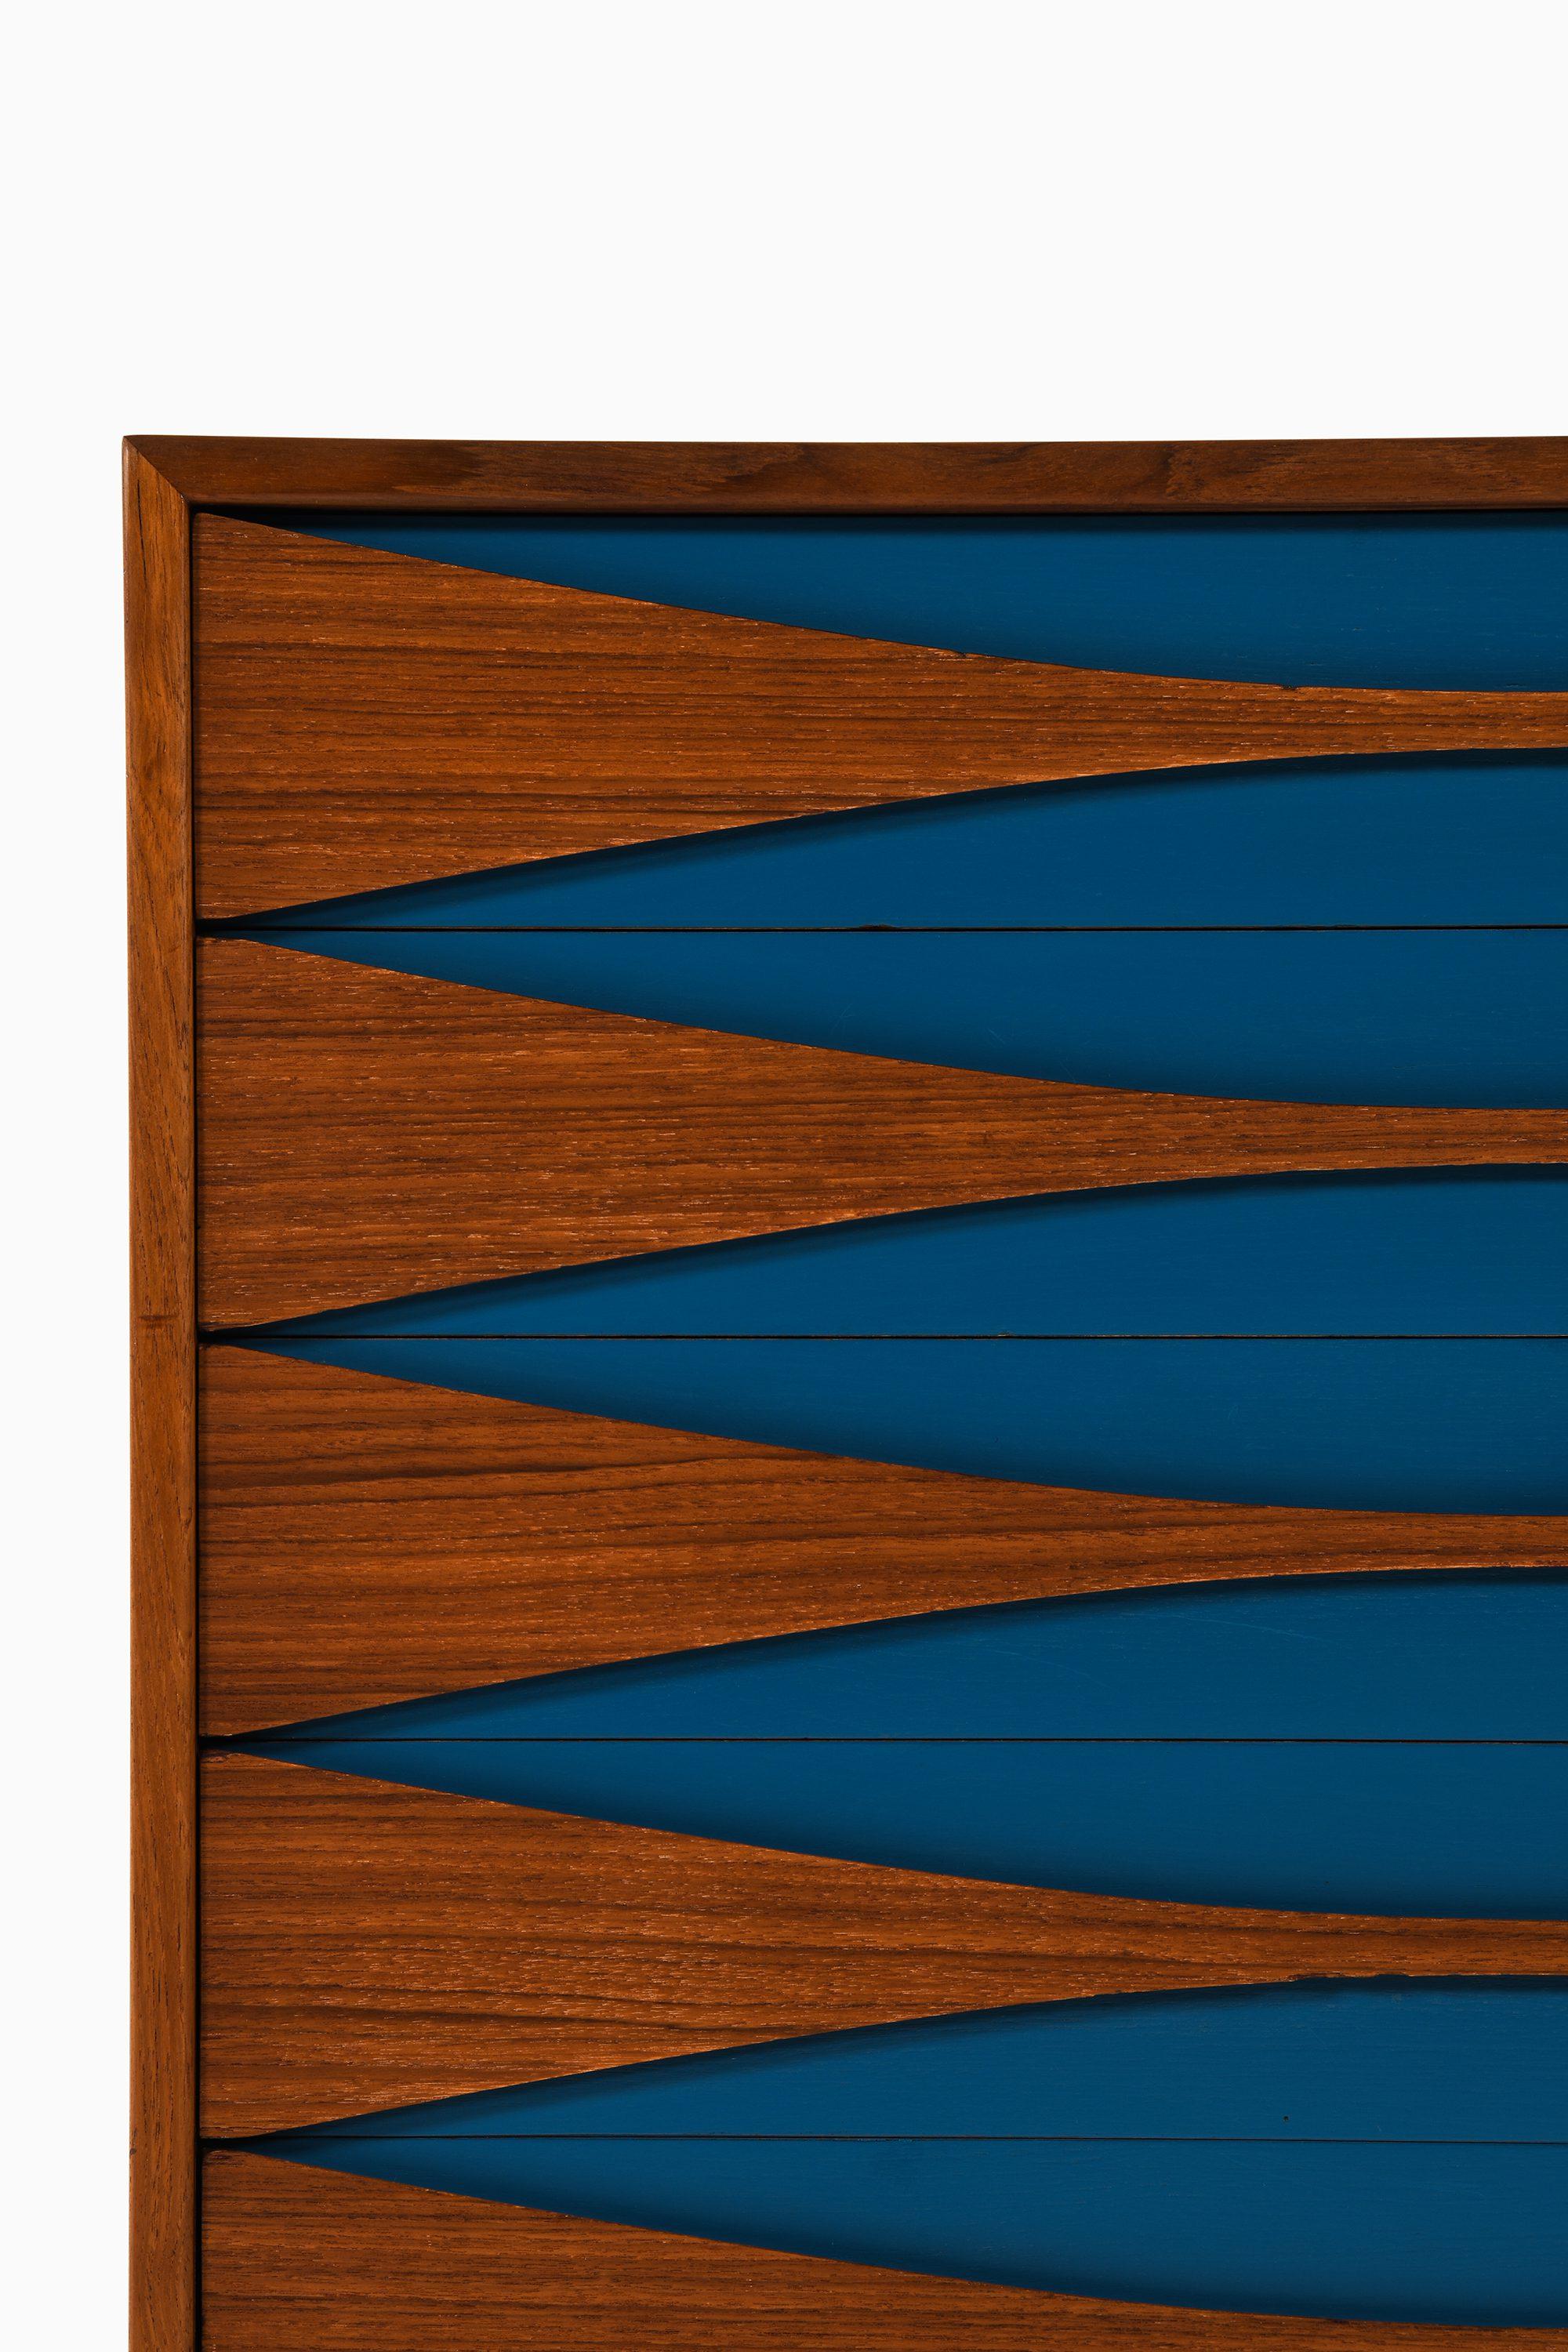 Danish Bureau in Teak and Blue Lacquered by Arne Vodder, 1950's For Sale